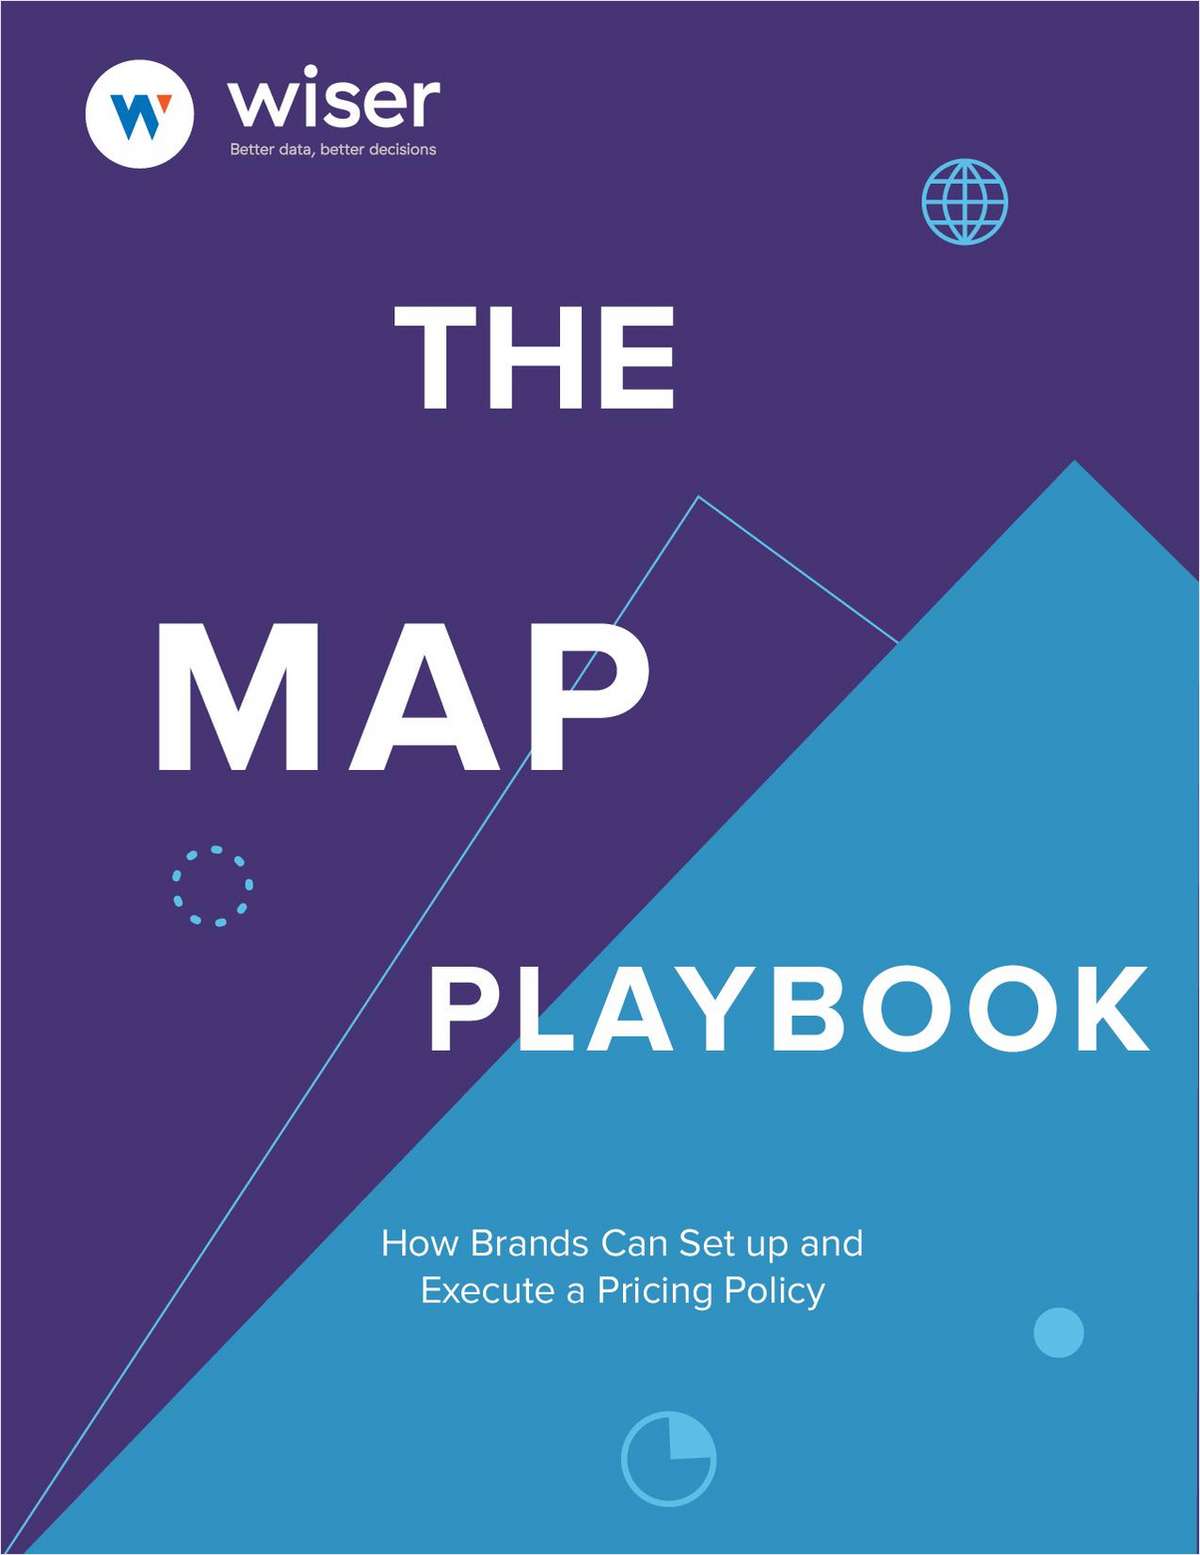 The MAP Playbook